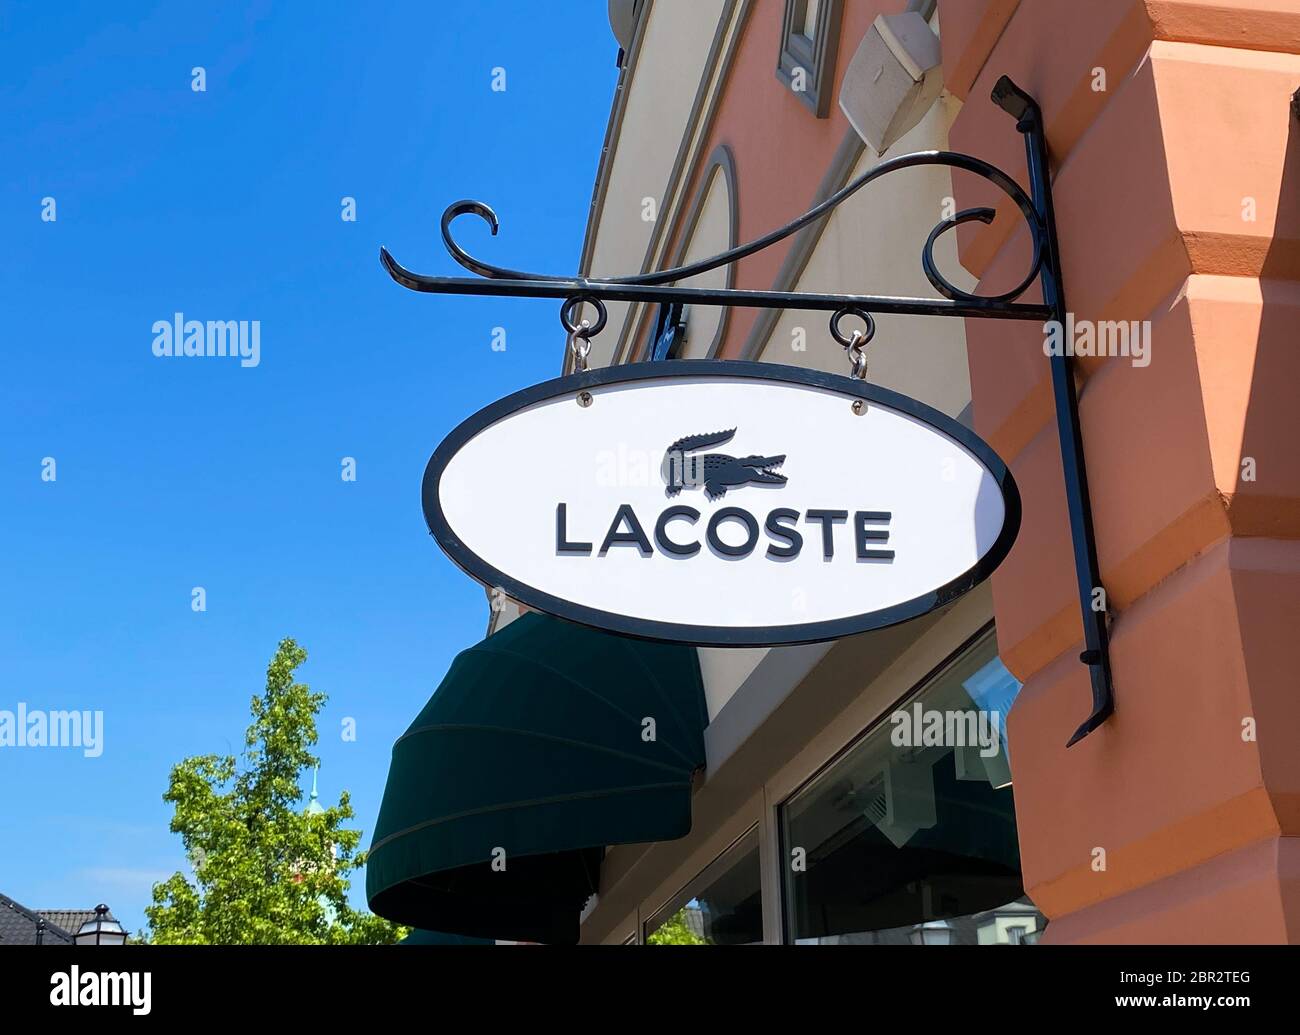 Roermond, Netherlands - May 19. 2020: View on logo lettering of French  Lacoste company at shop entrance Stock Photo - Alamy